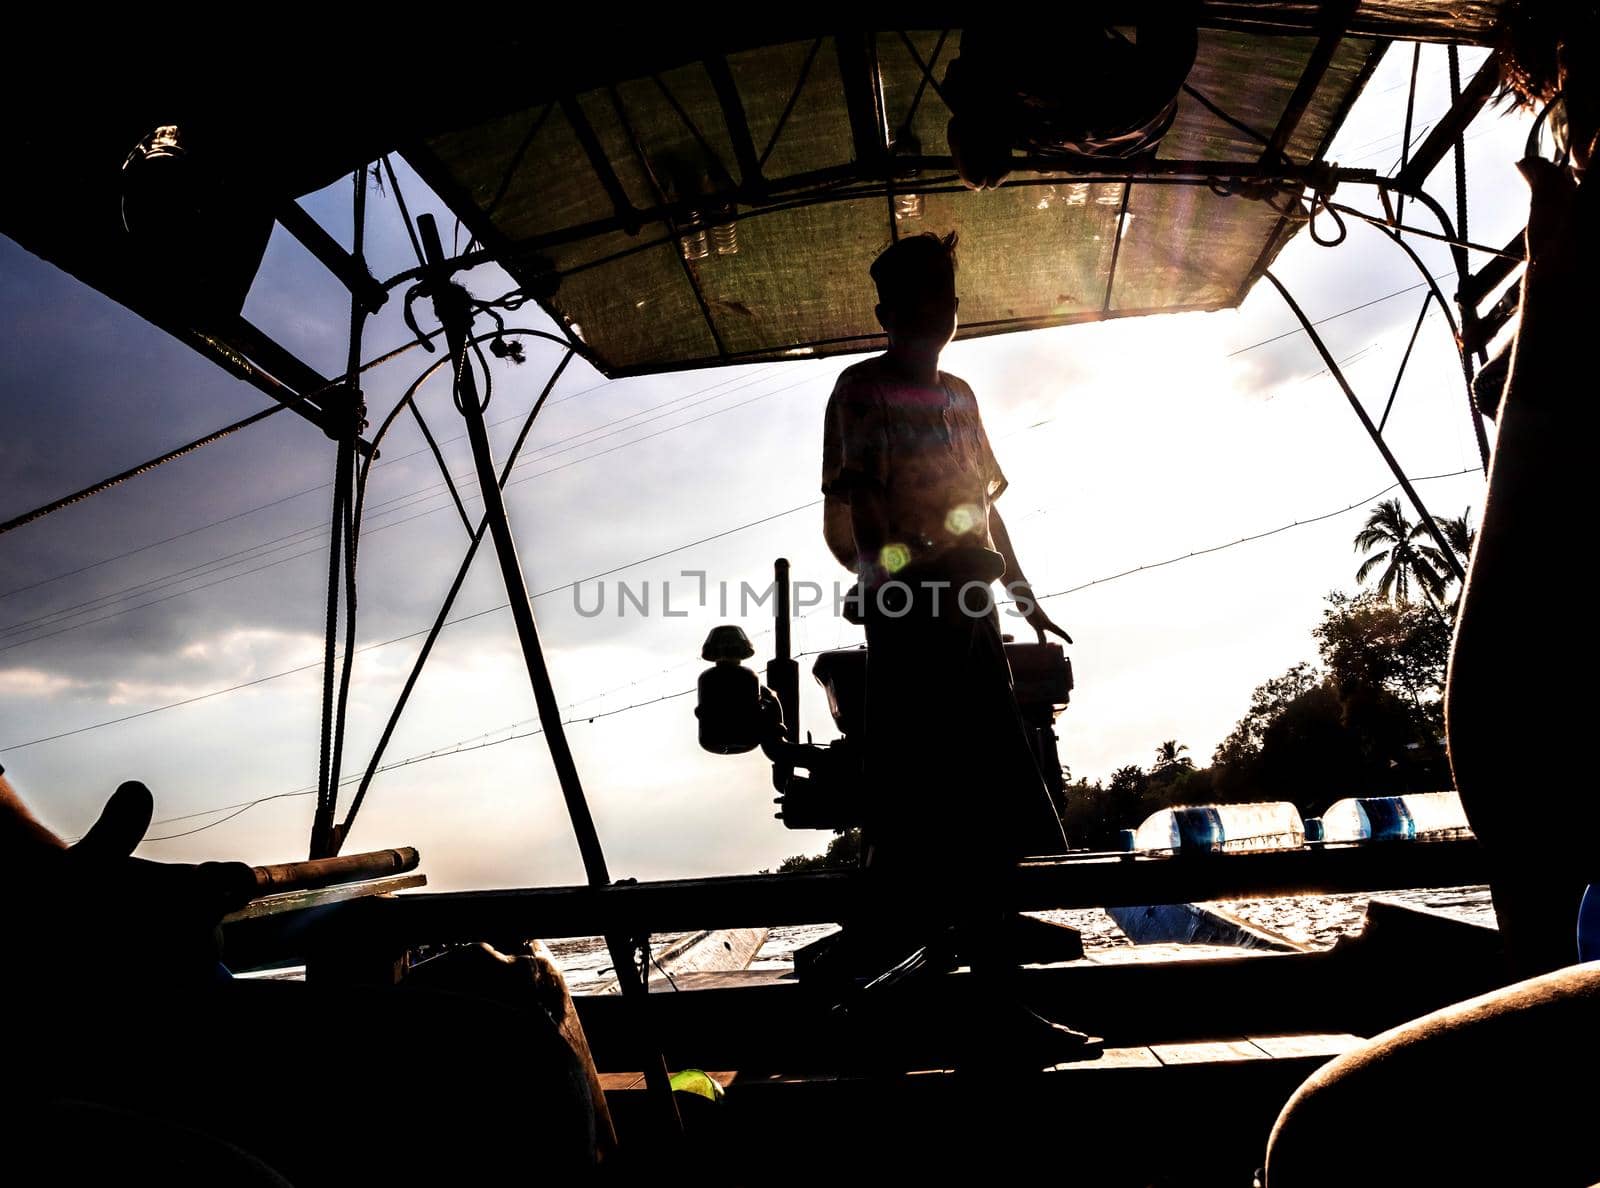 Silhouette of a passenger boat driver in the daytime backlit